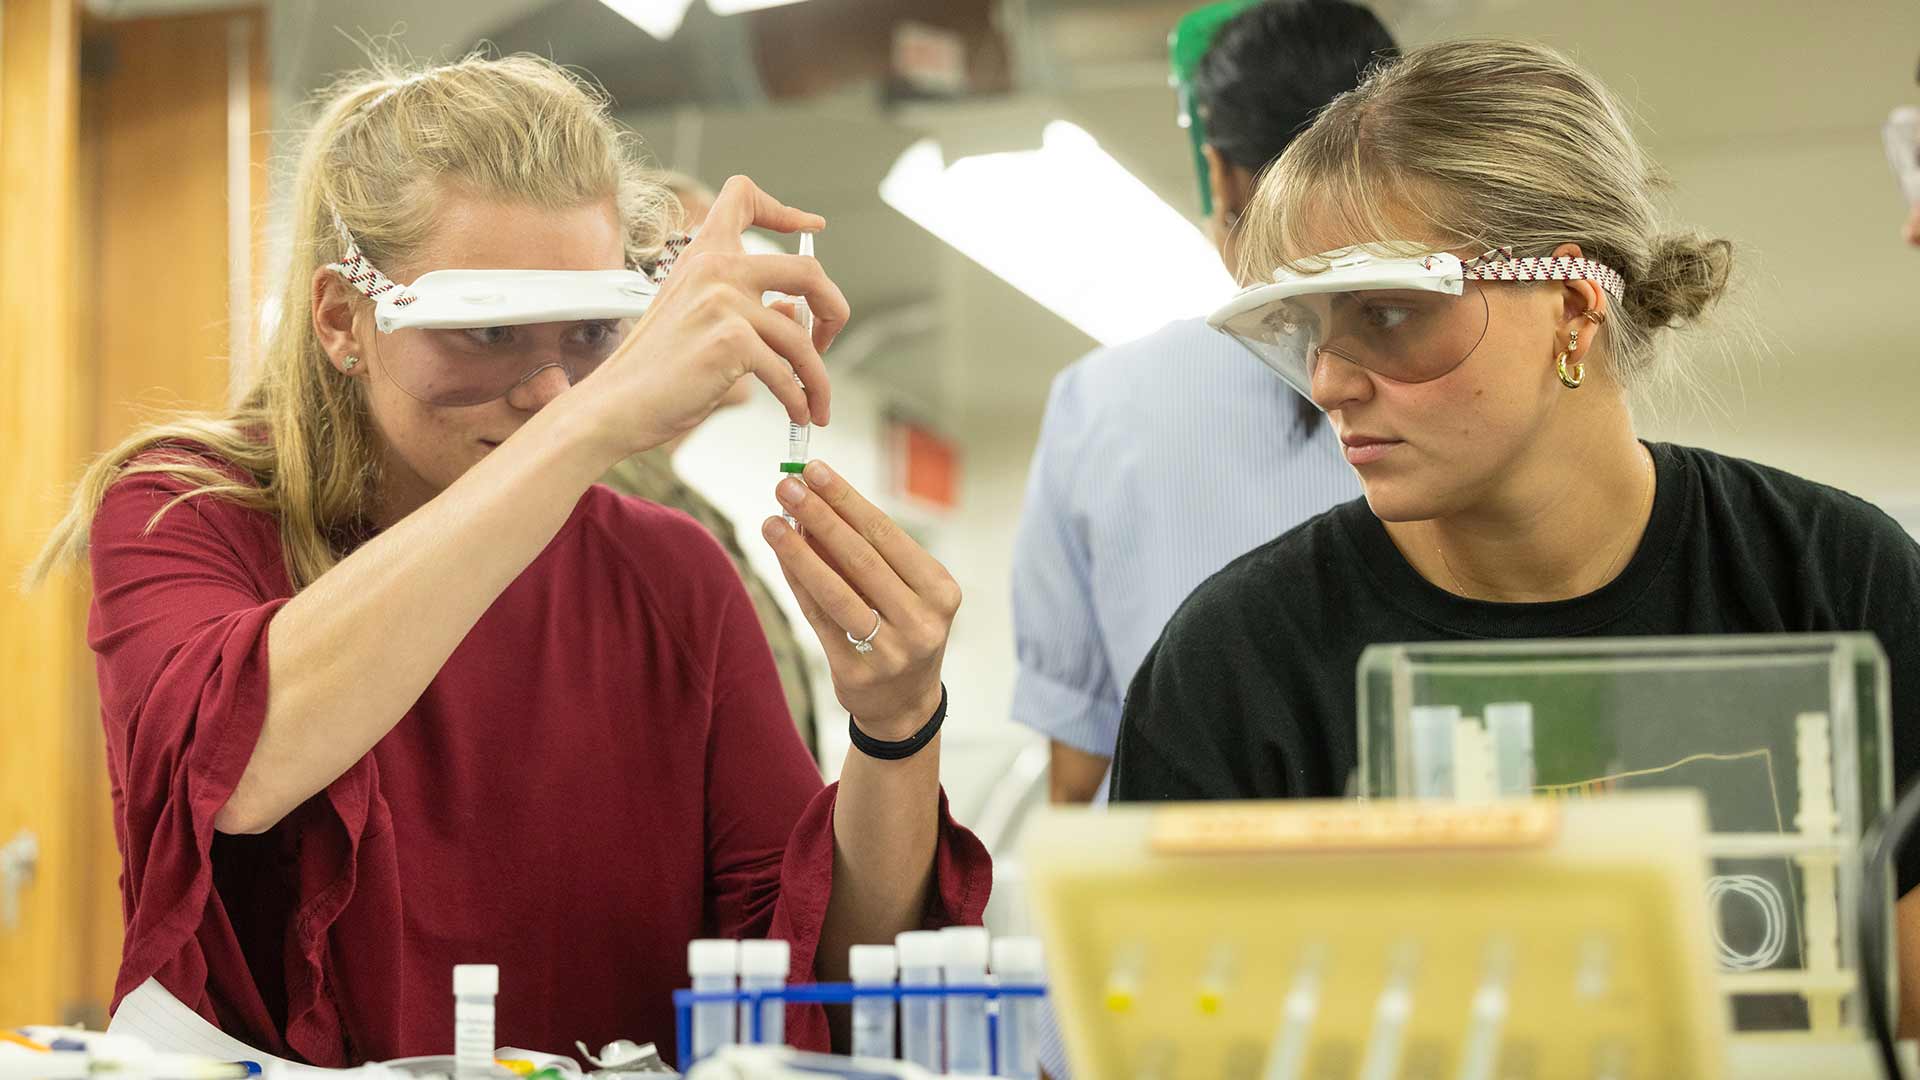 Two chemistry students handling materials in a lab setting.